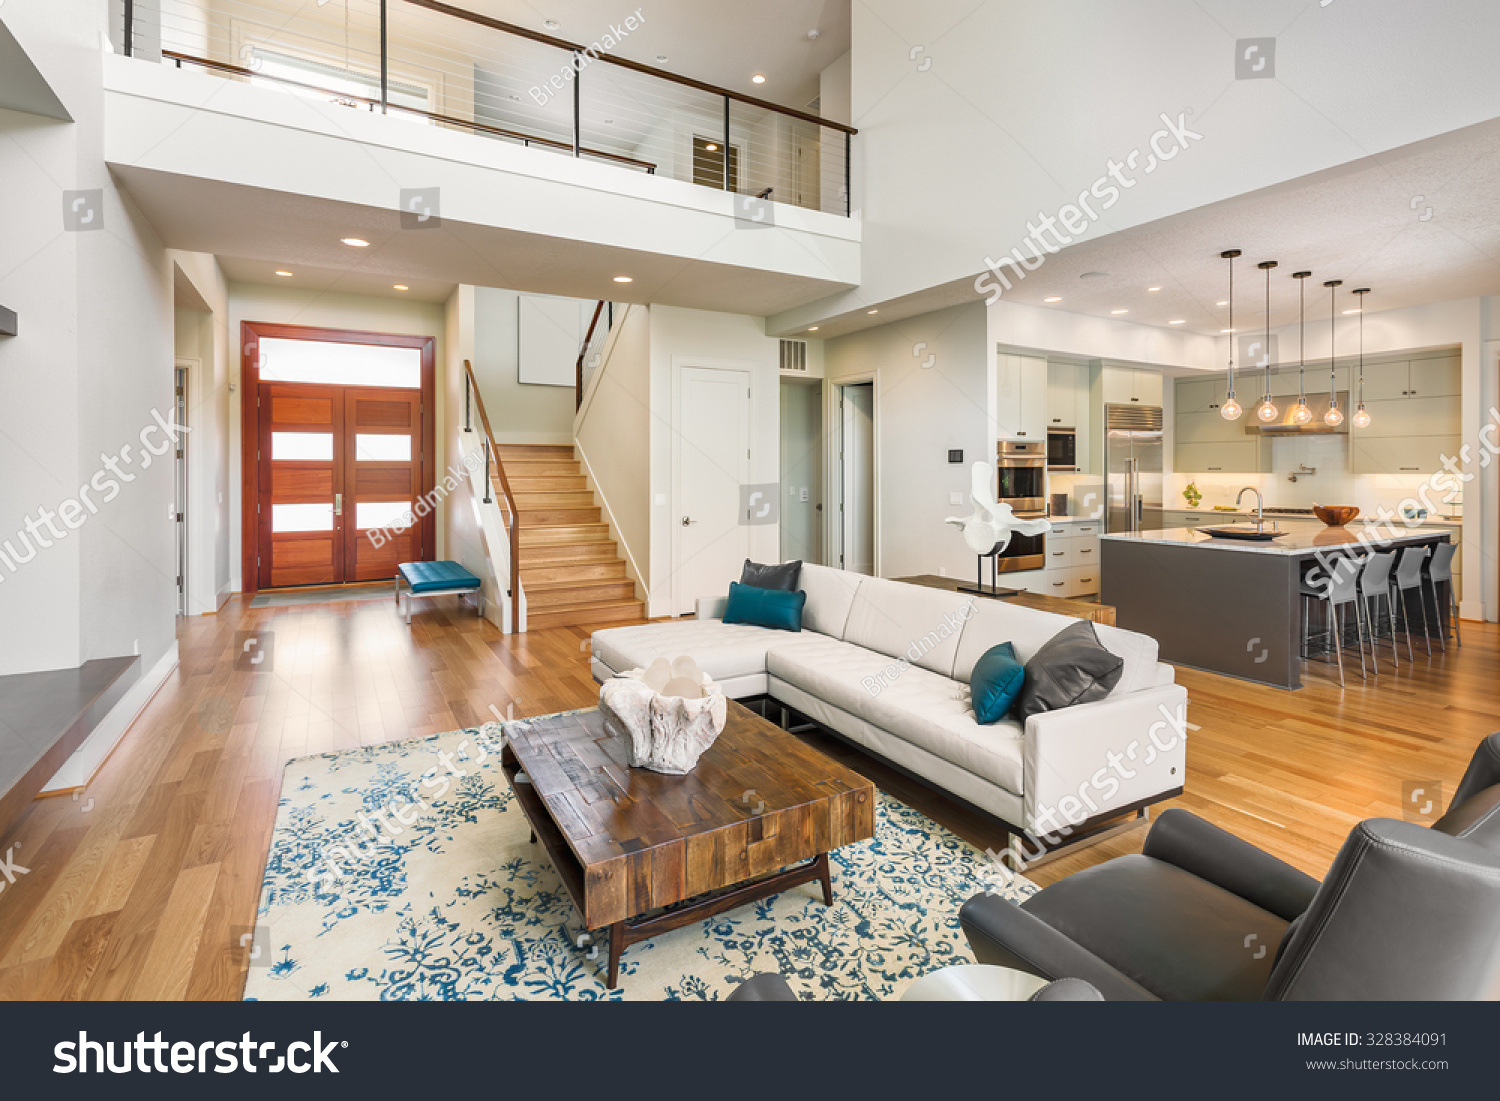 Beautiful and large living room interior with hardwood floors and vaulted ceiling in new luxury home. View of Kitchen, entryway, and second story loft style area #328384091